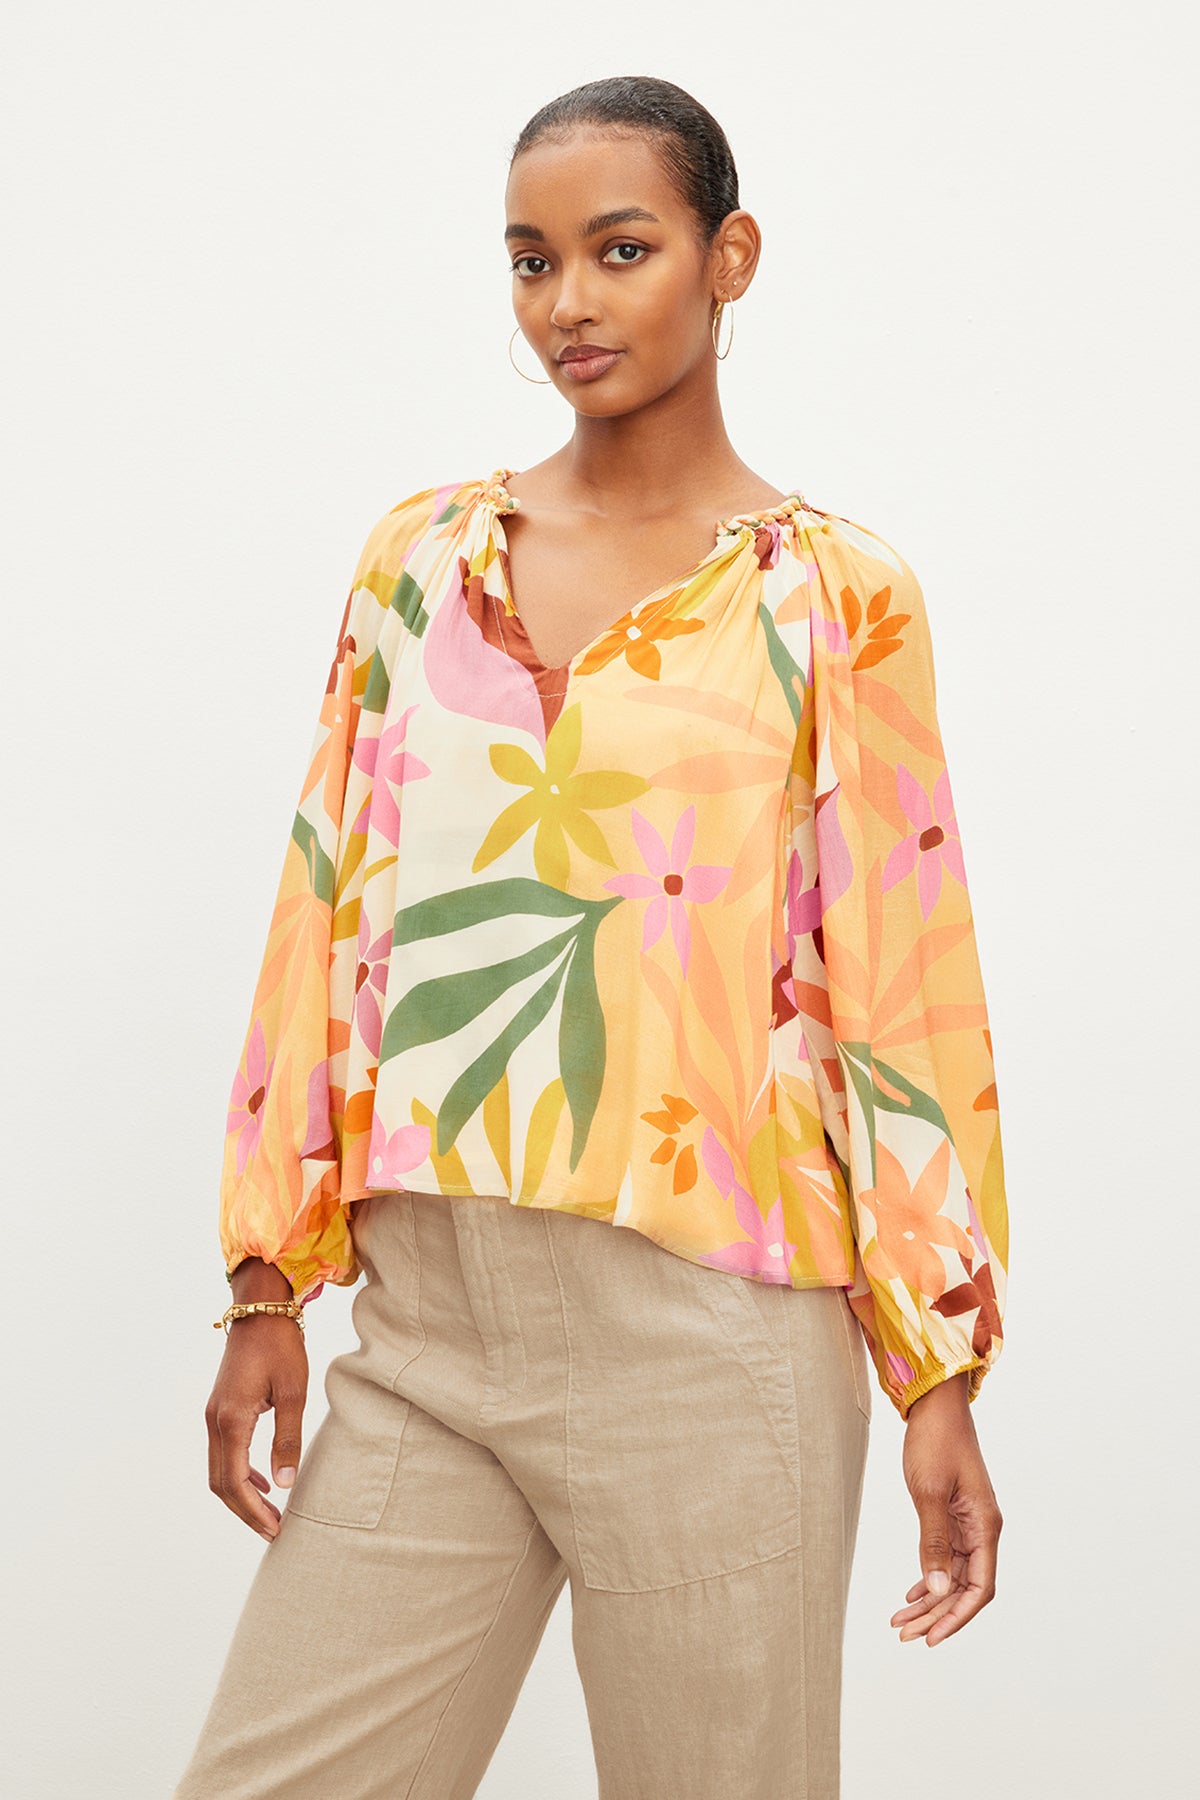 A model wearing the Velvet by Graham & Spencer DION PRINTED BOHO TOP with a tropical print and v-neckline.-35955700596929